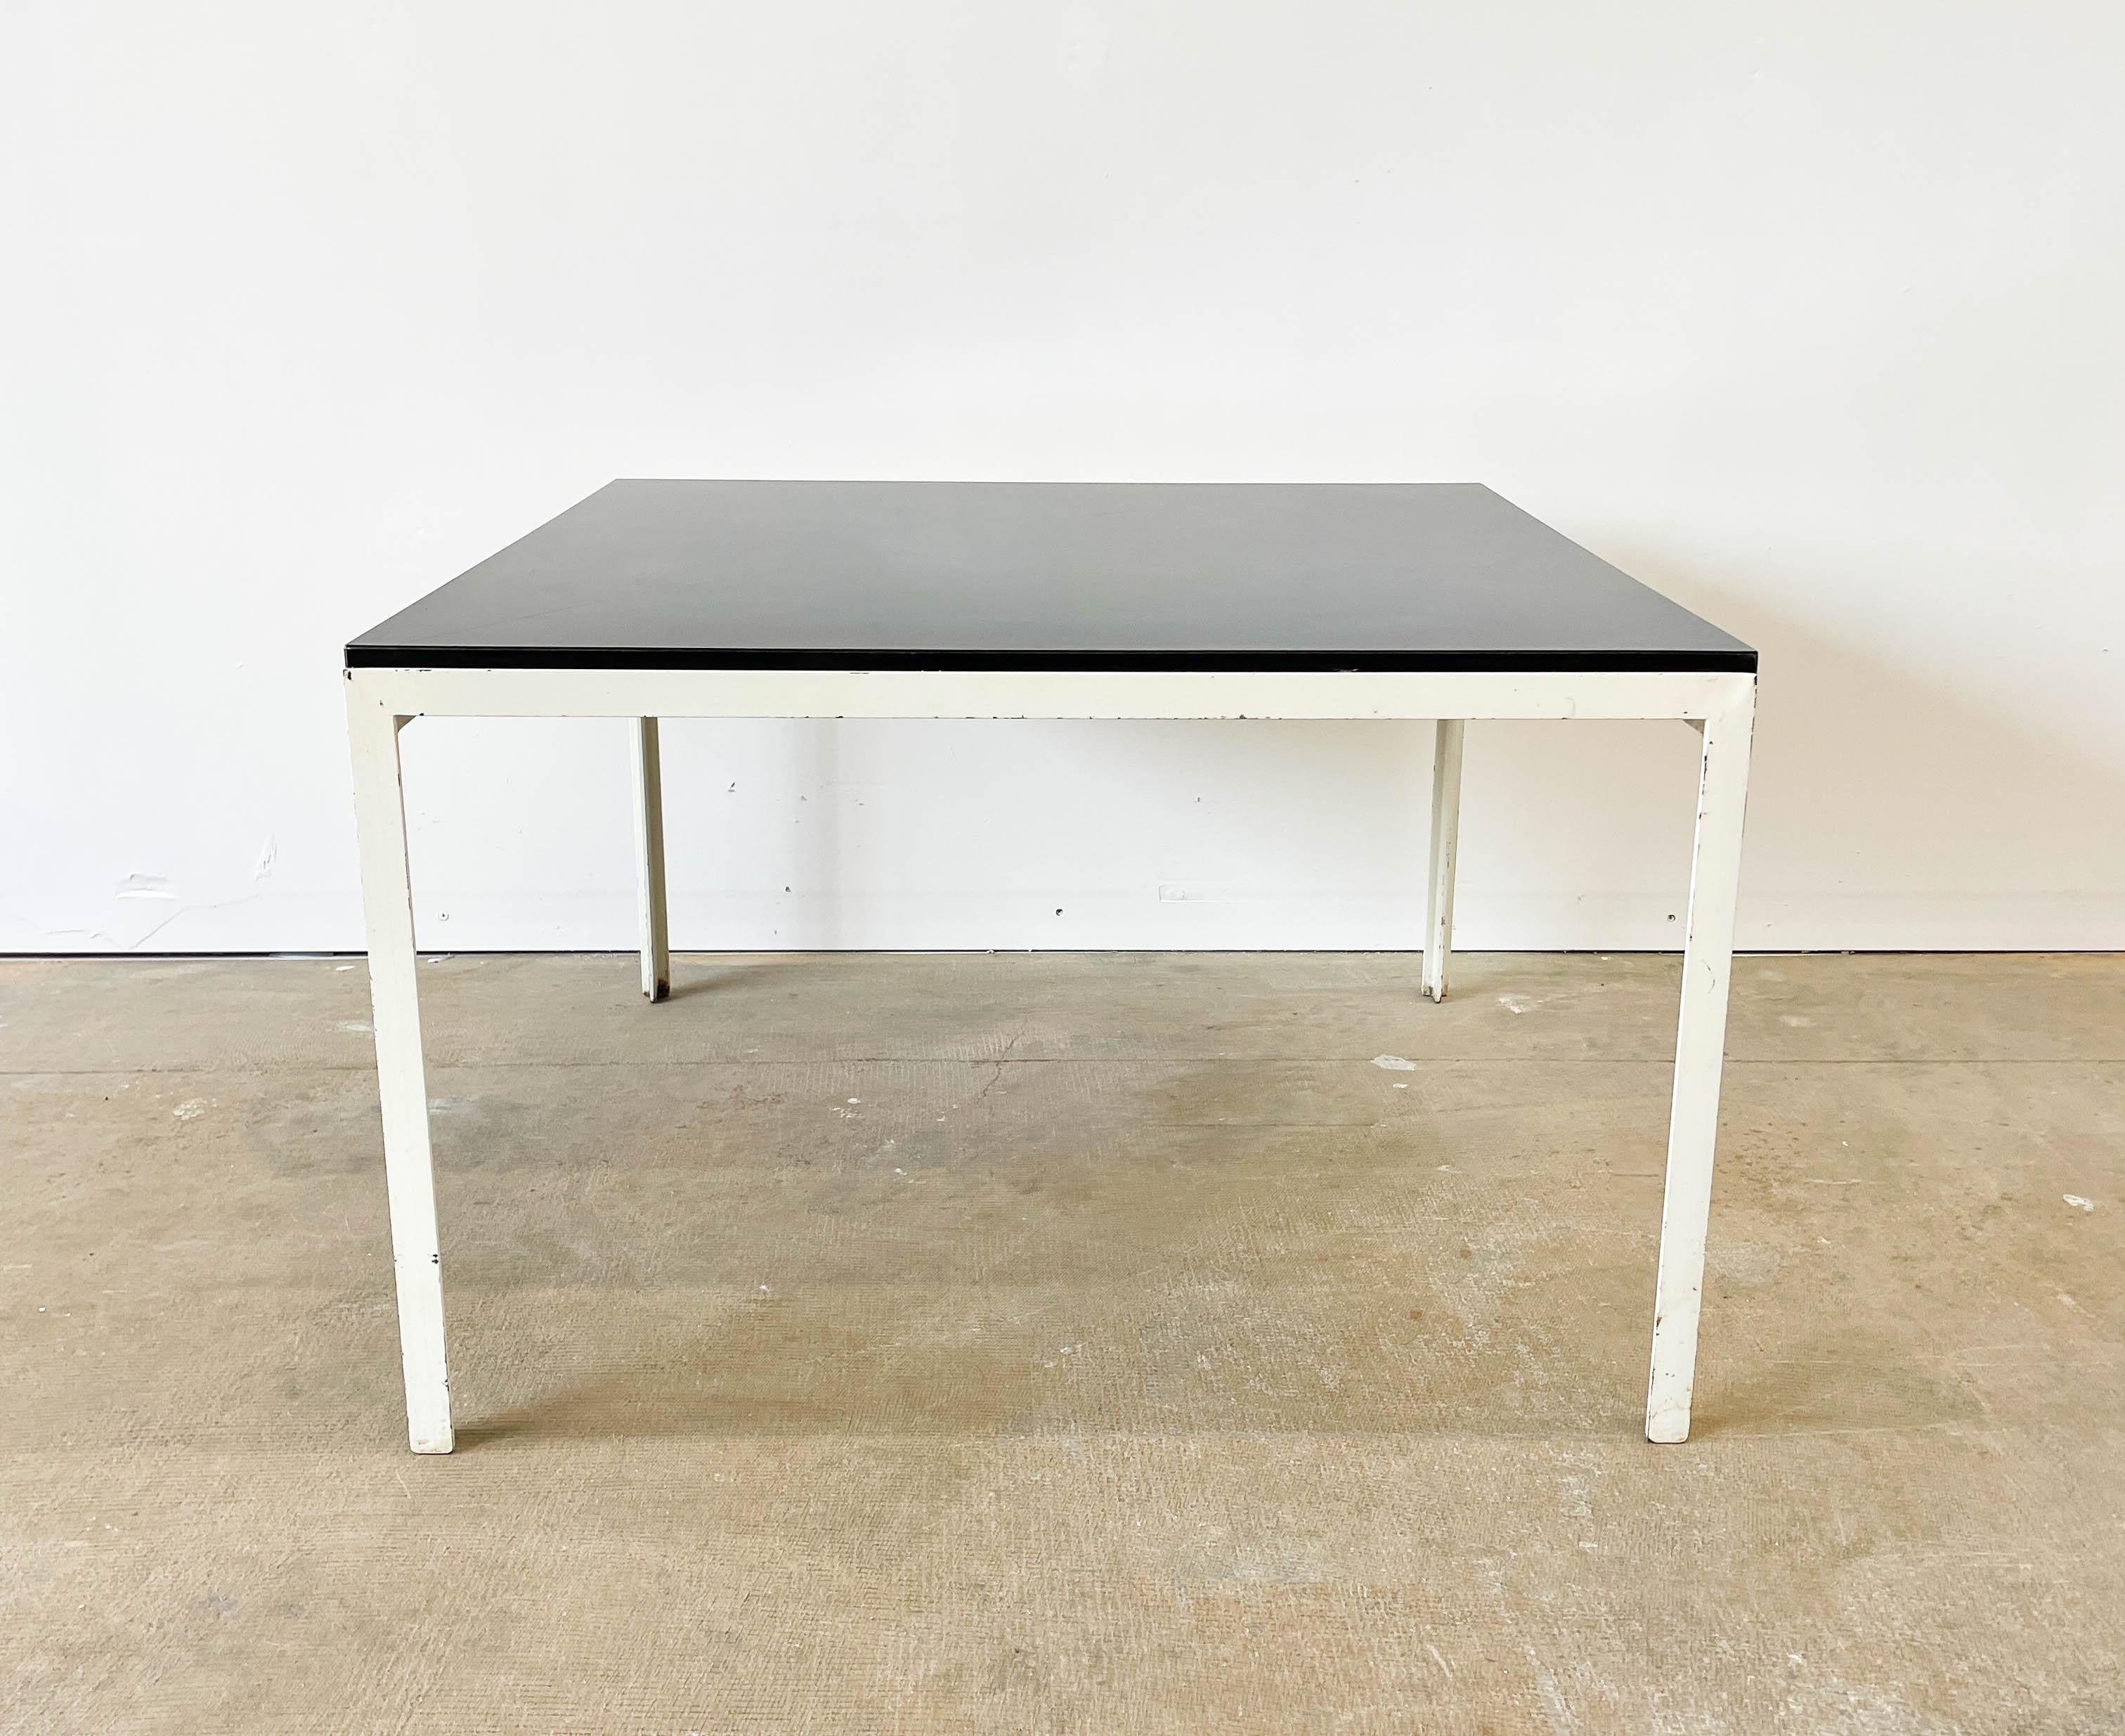 This classic steel T-Bar coffee table was designed by Florence Knoll in approximately 1952. It still retains its original Knoll Bowtie Label, confirming that it is part of an early Knoll collection from the early 1950s. The laminate top is in good